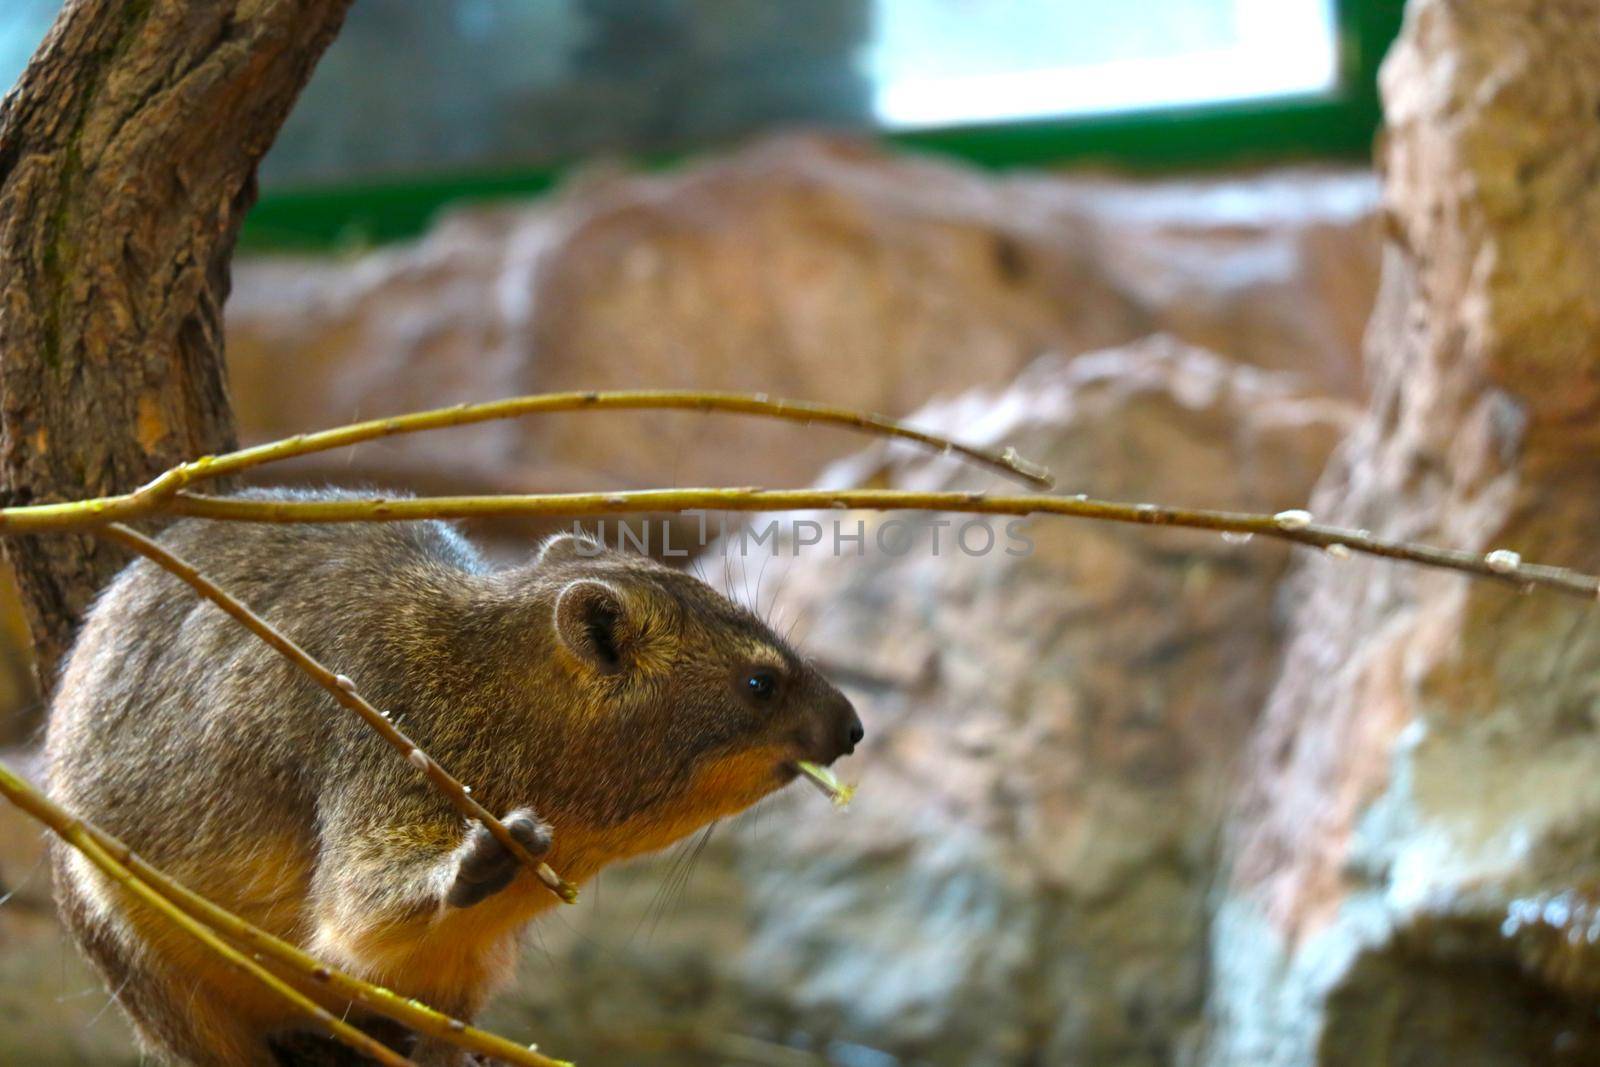 Blurry background, out of focus, a wild rodent eats a branch of a tree or bush. by kip02kas